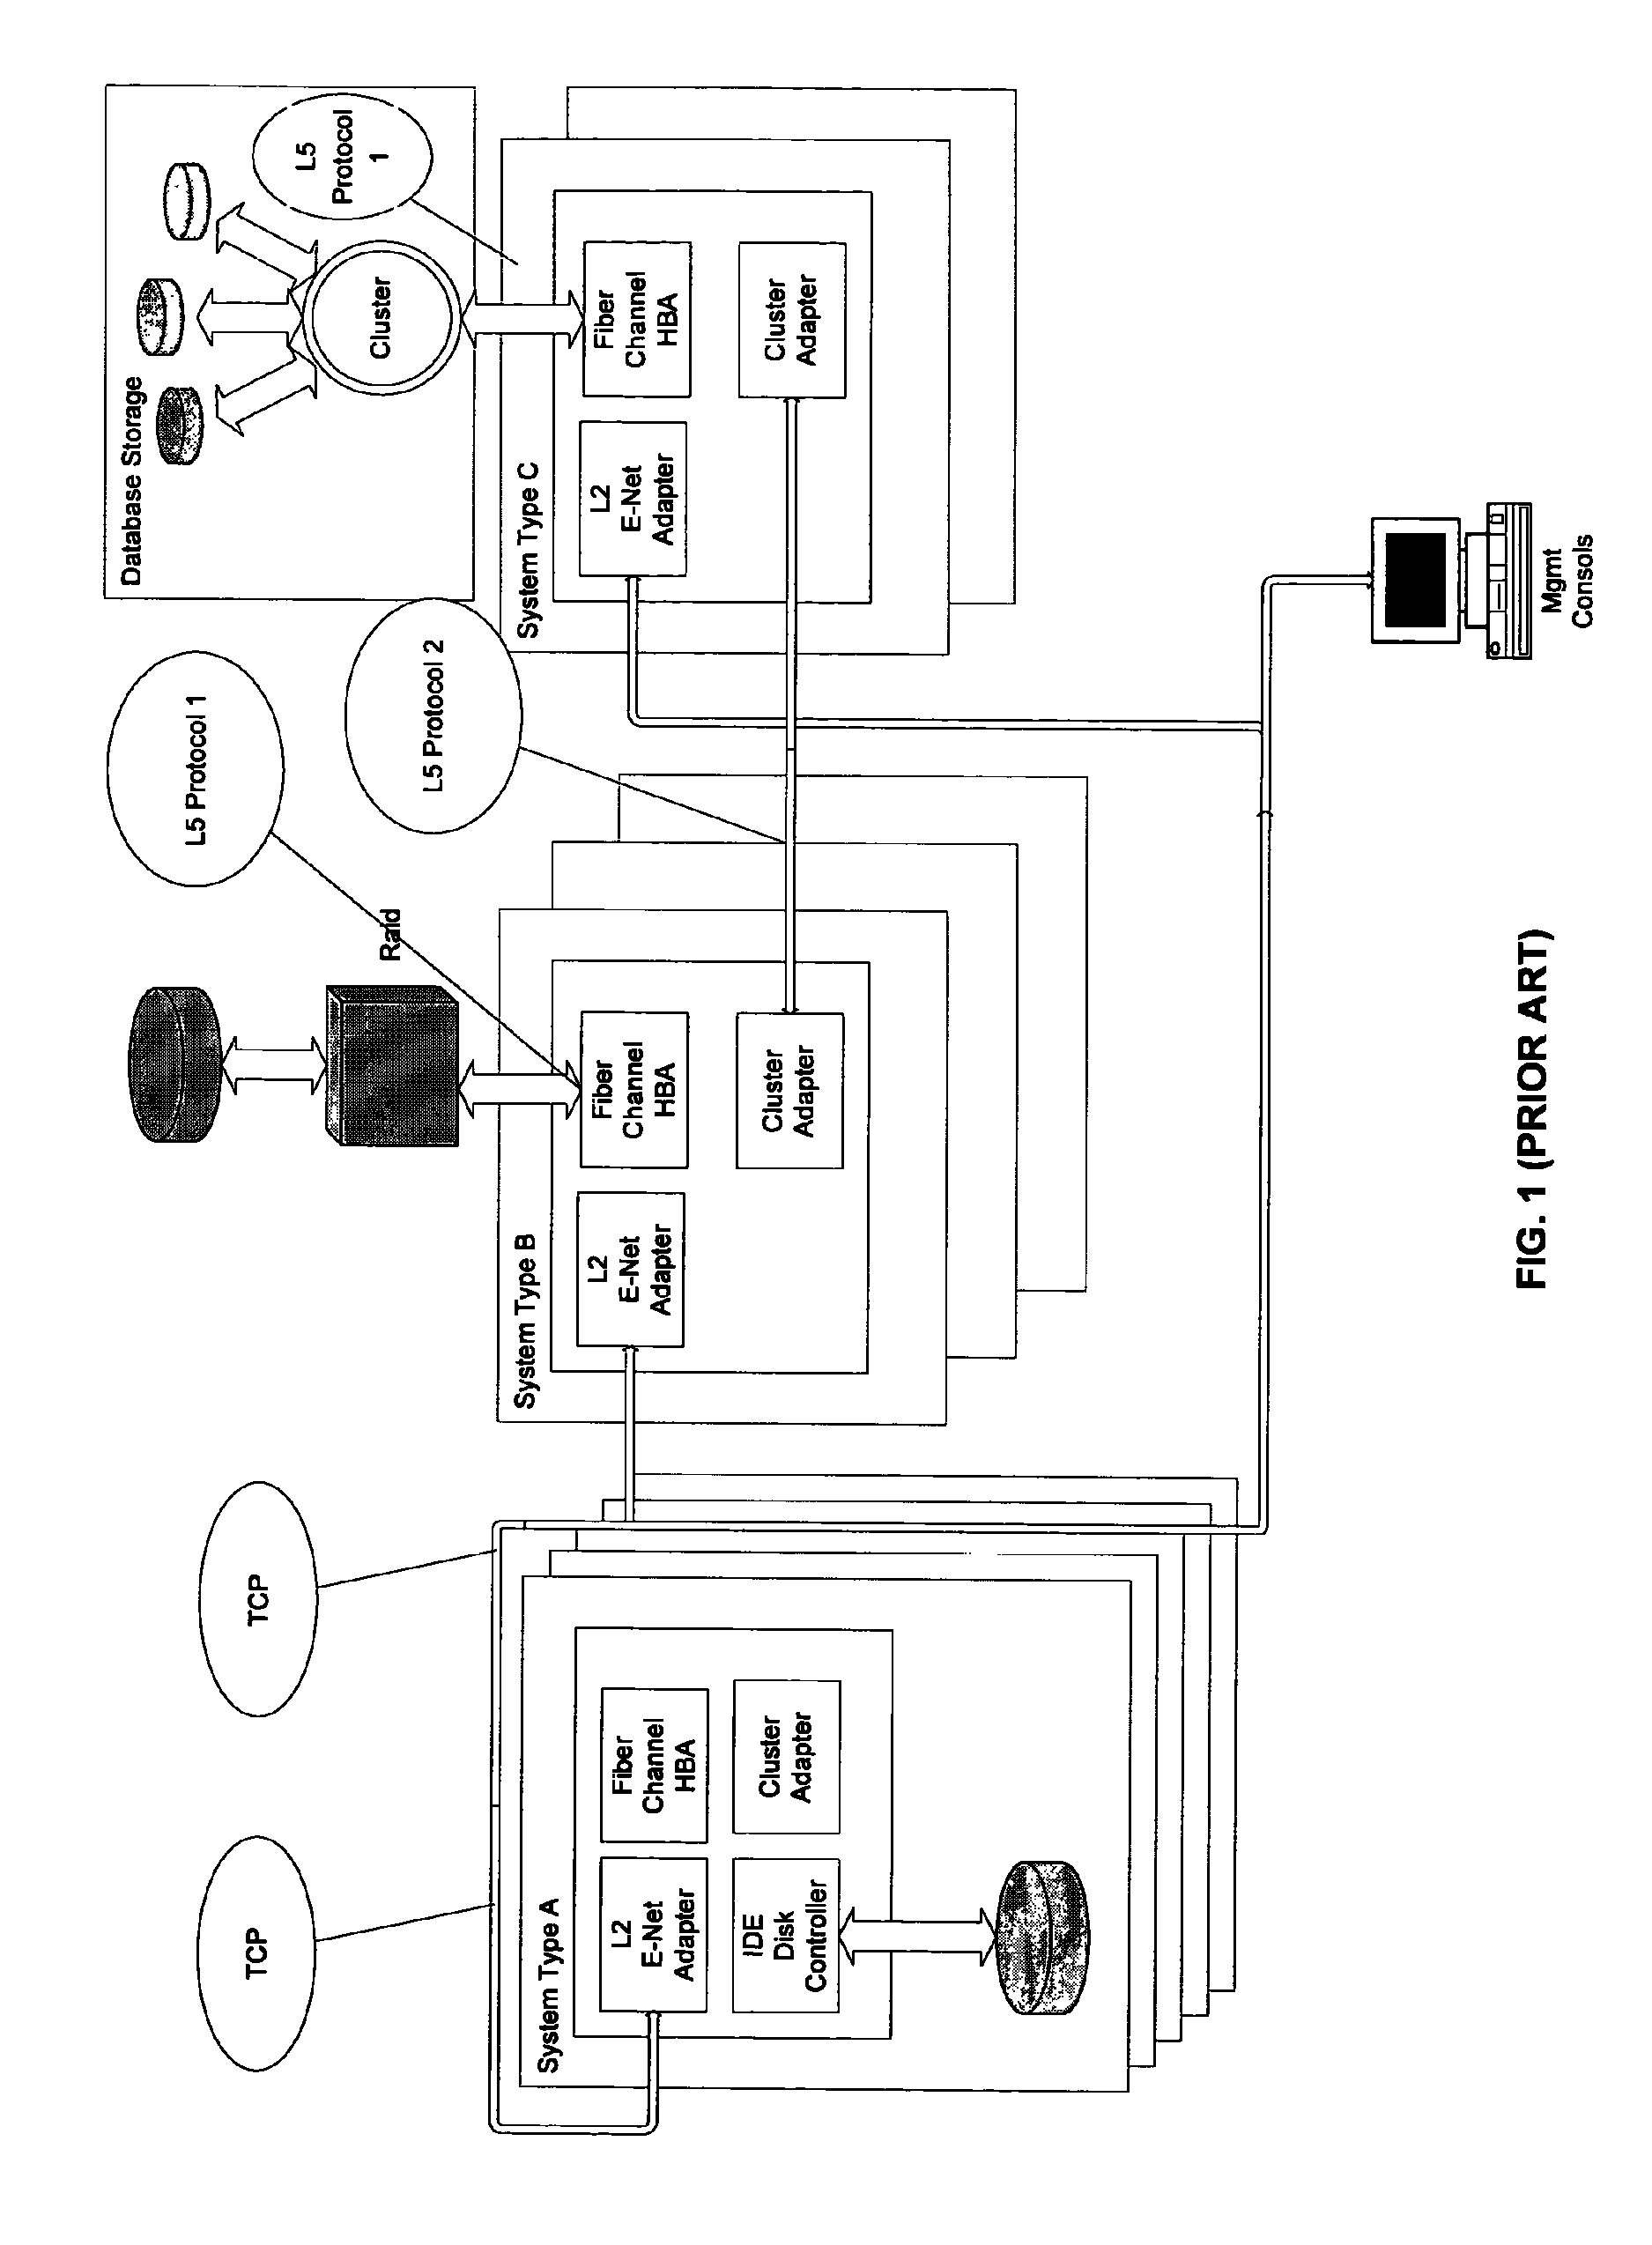 System and method for network interfacing